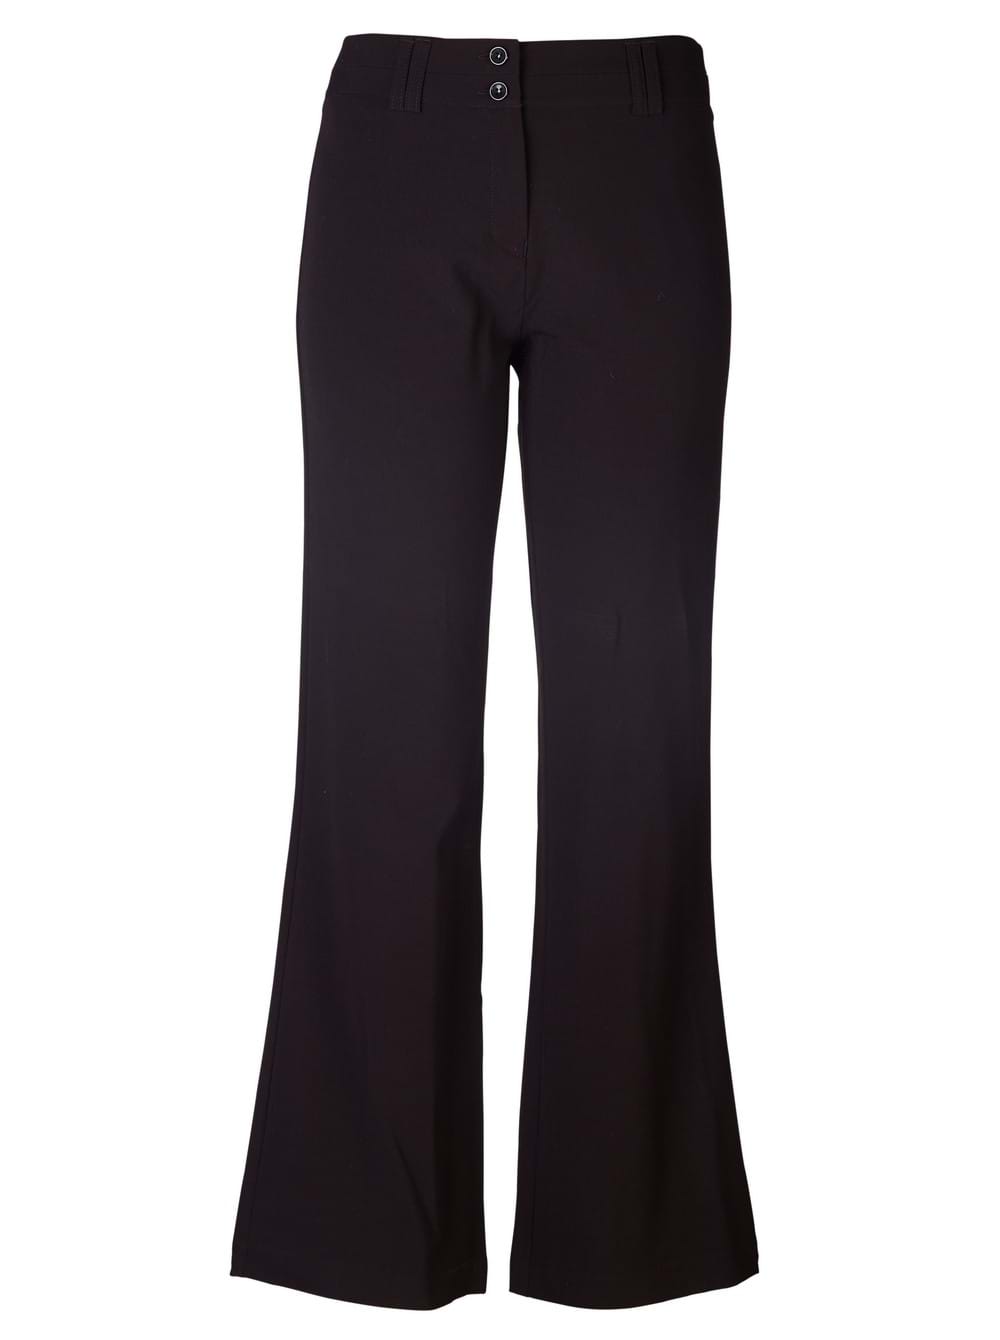 Lovely Lady Trousers  Buy Lovely Lady Trousers online in India